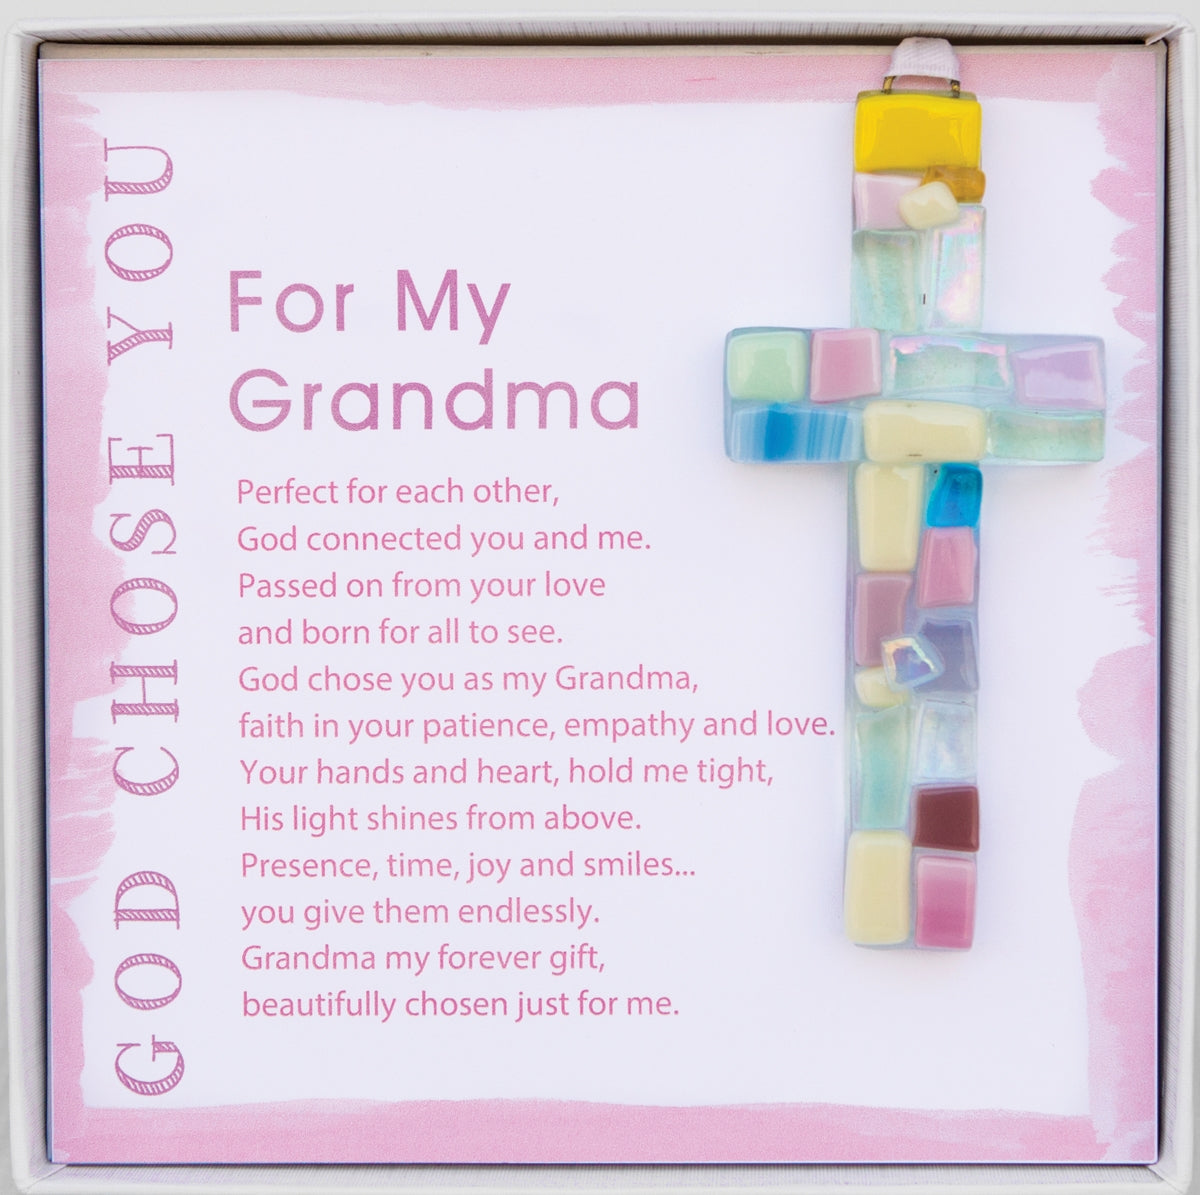 Handmade 4" pastel mosaic glass cross and "For My Grandma" sentiment in white box with clear lid.